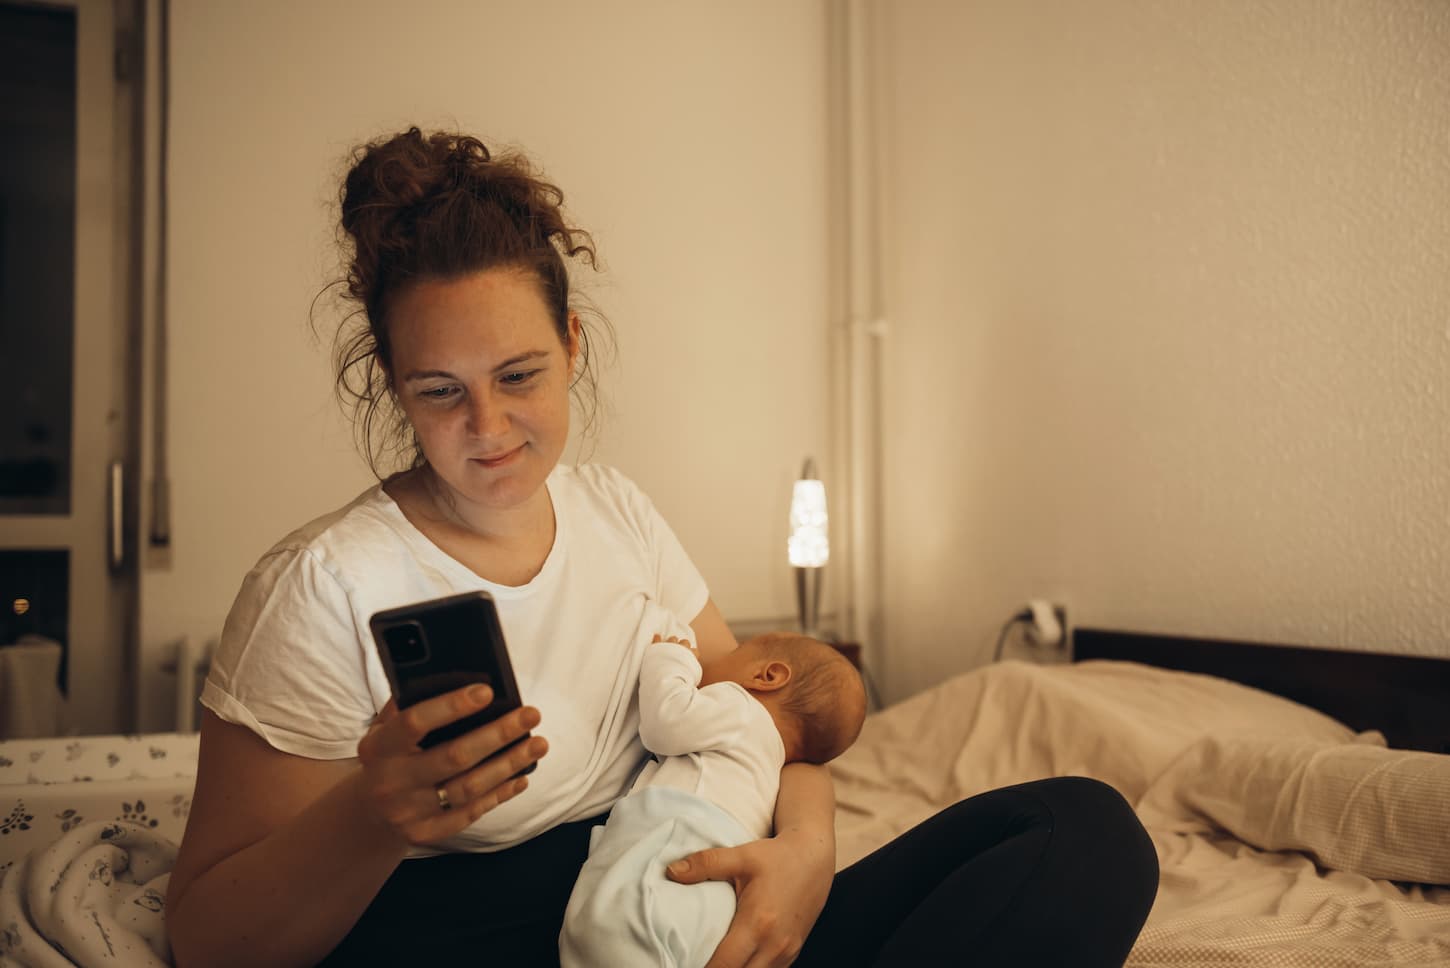 An image of a Young busy mother using a smartphone and breastfeeding her baby boy while sitting on a bed at home.